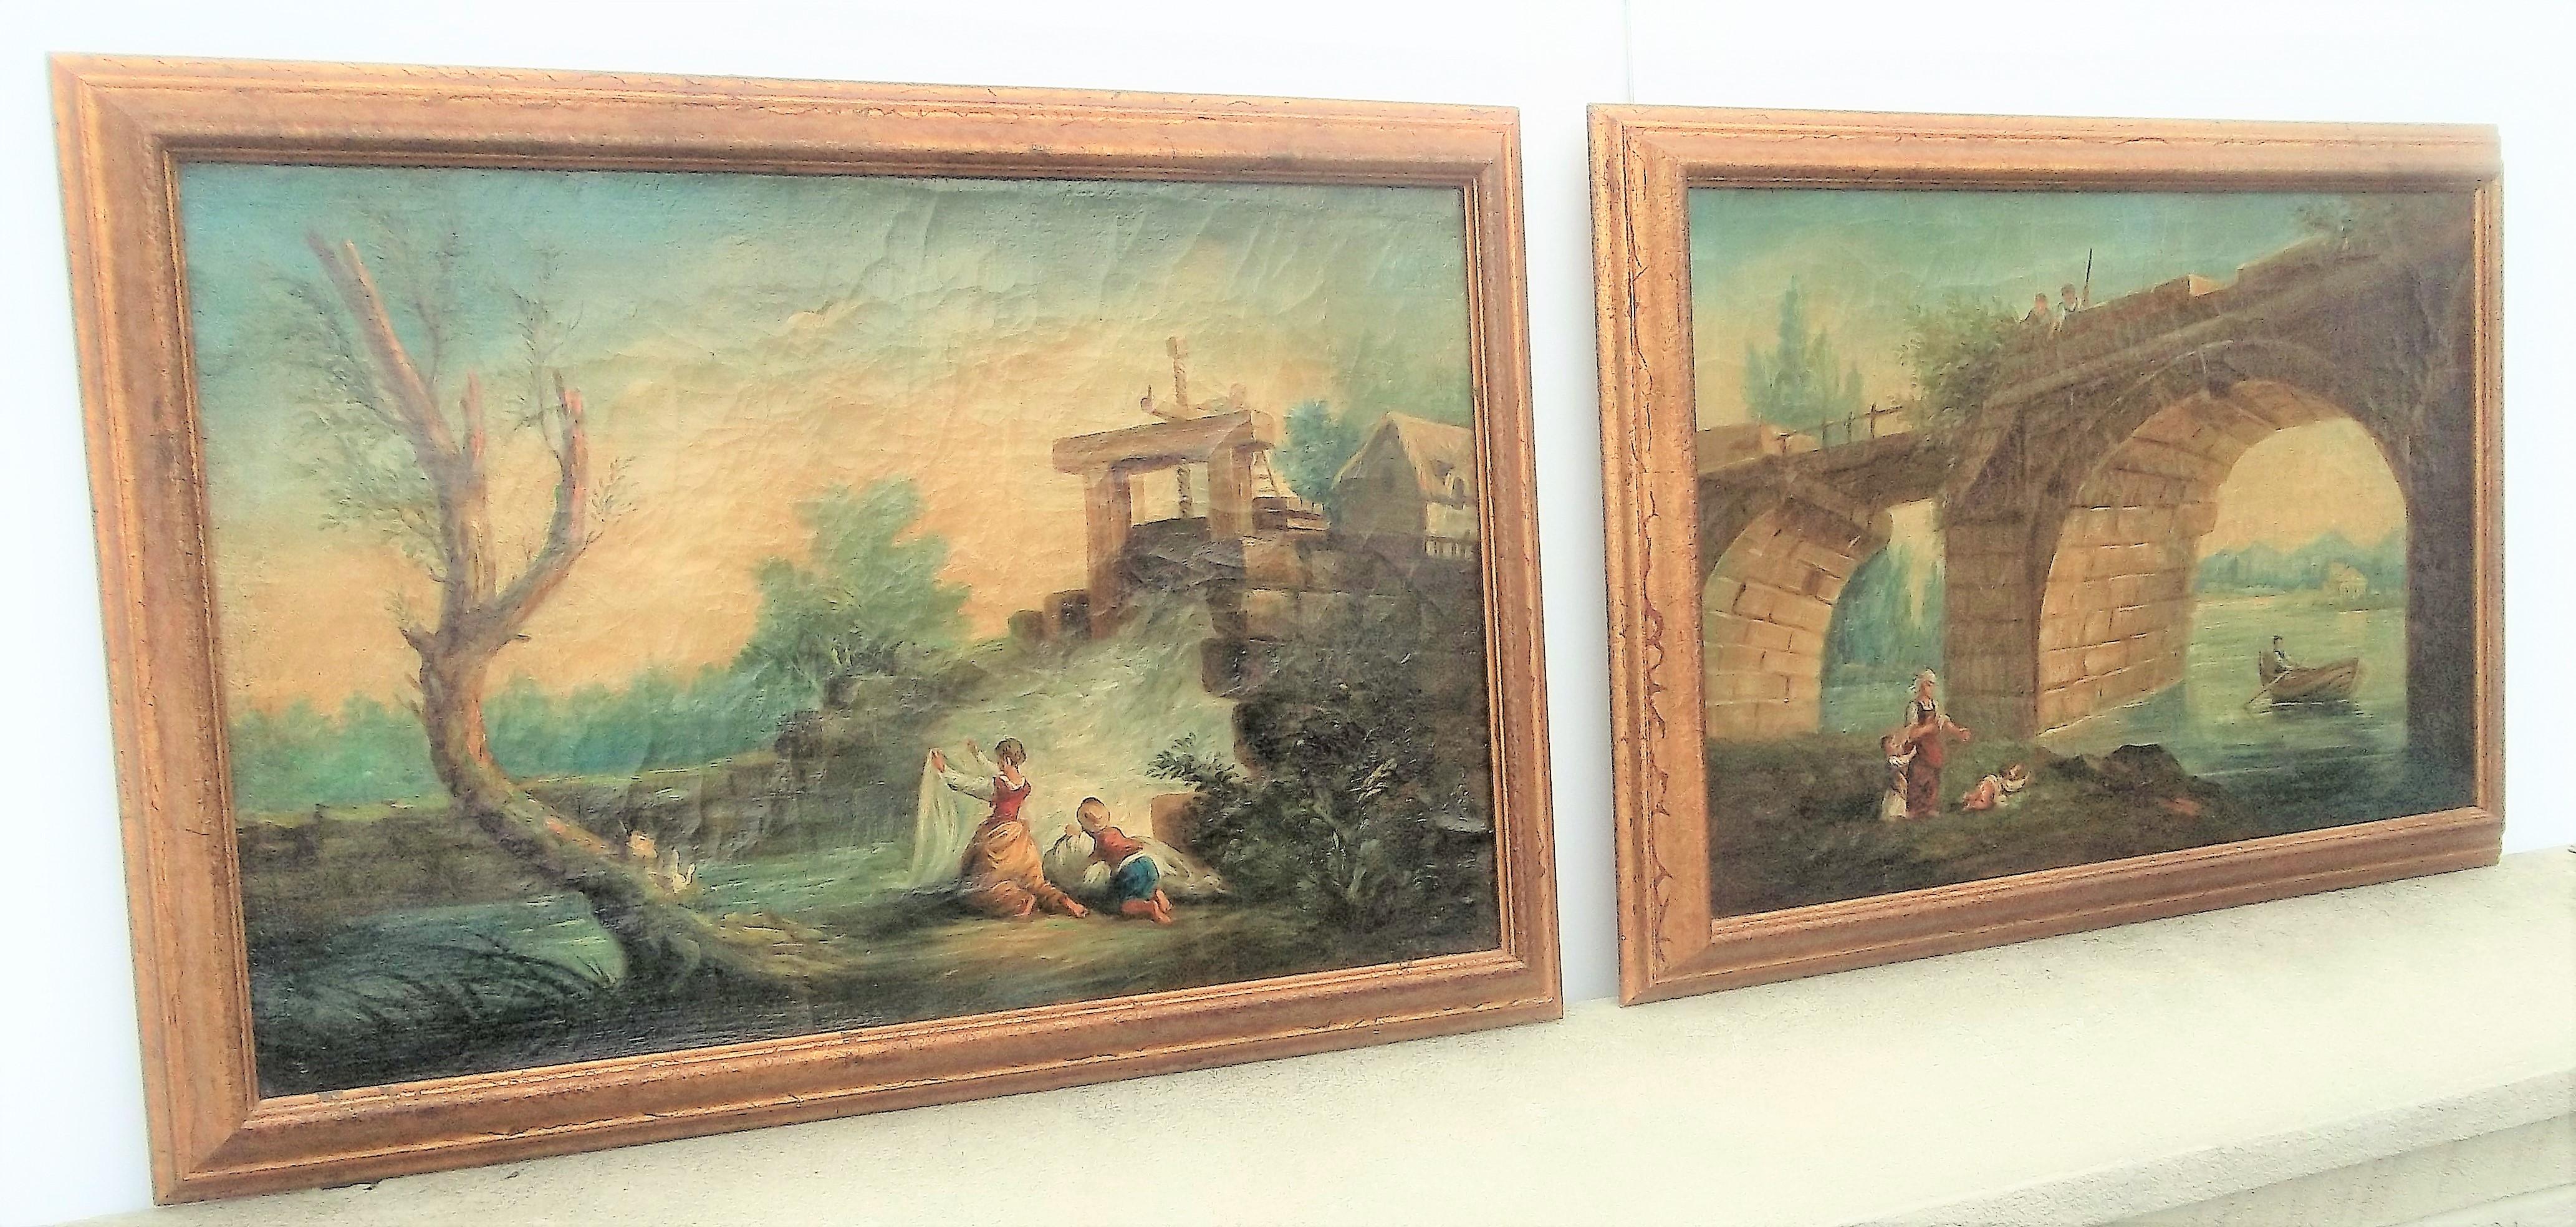 Early to Mid-19th century. Very colorful. 

The Bridge
The Mill

Craquelure throughout as visible in photos. 
Later frames.
Later frames (mid-20th century), typical wear

Sight of canvas: 16.5